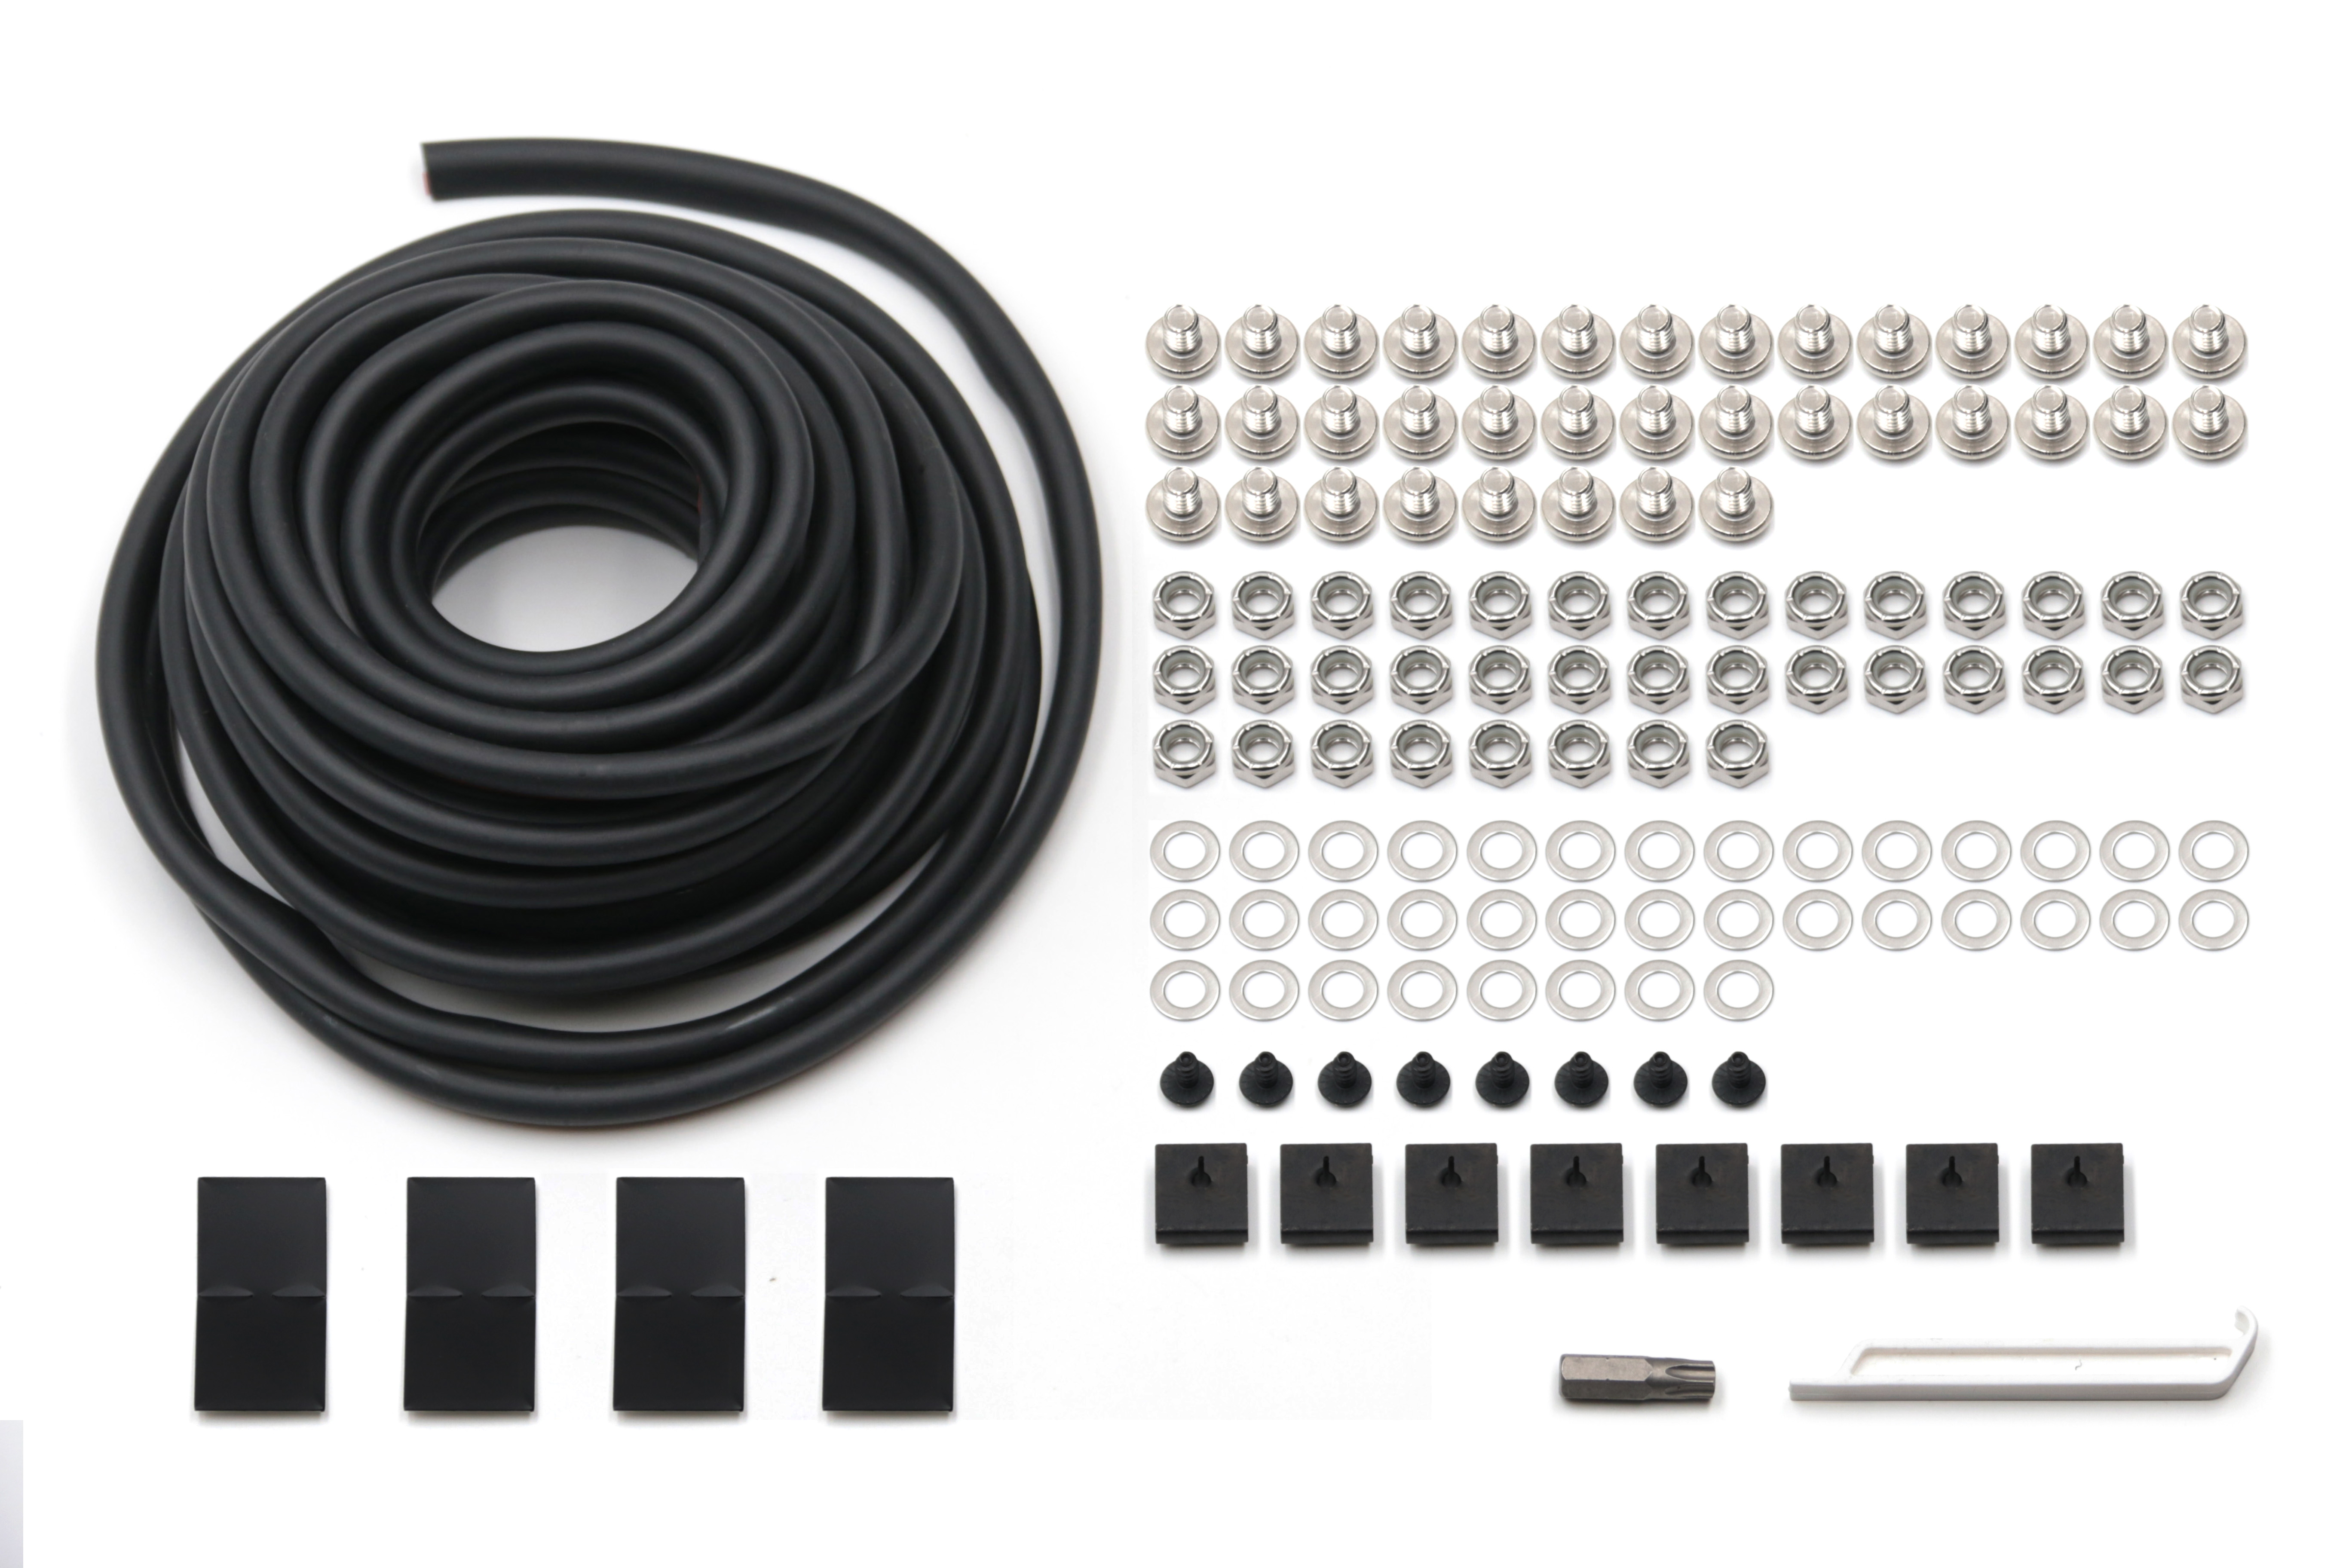 SP-FF4098 Hardware kit for TG-FF8F4098 and TG-FF8F4097